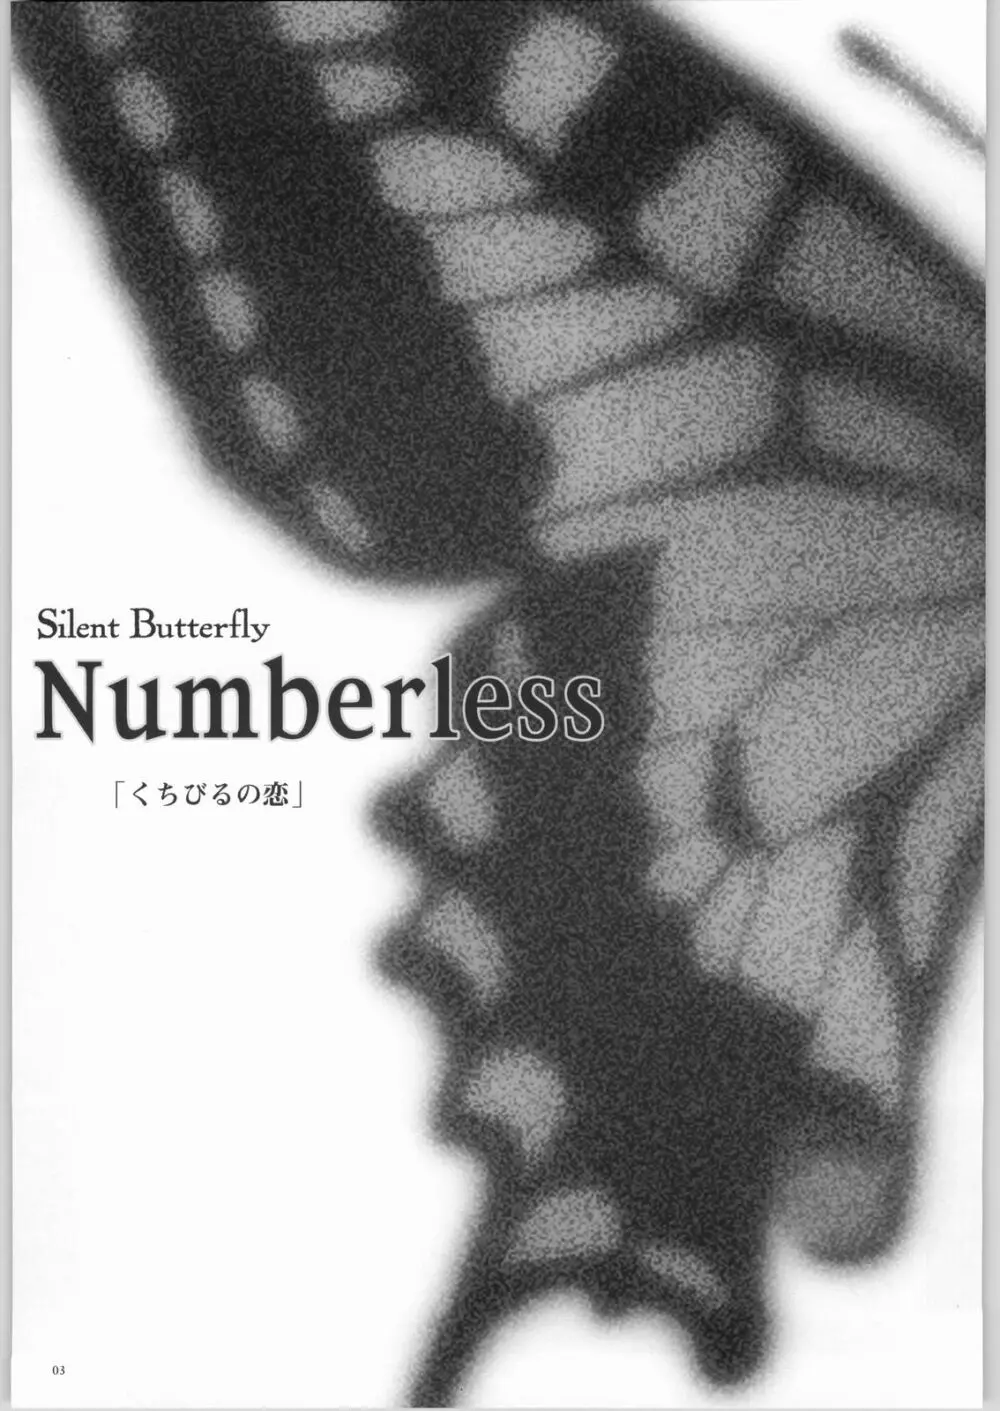 Silent Butterfly Numberless 2ページ